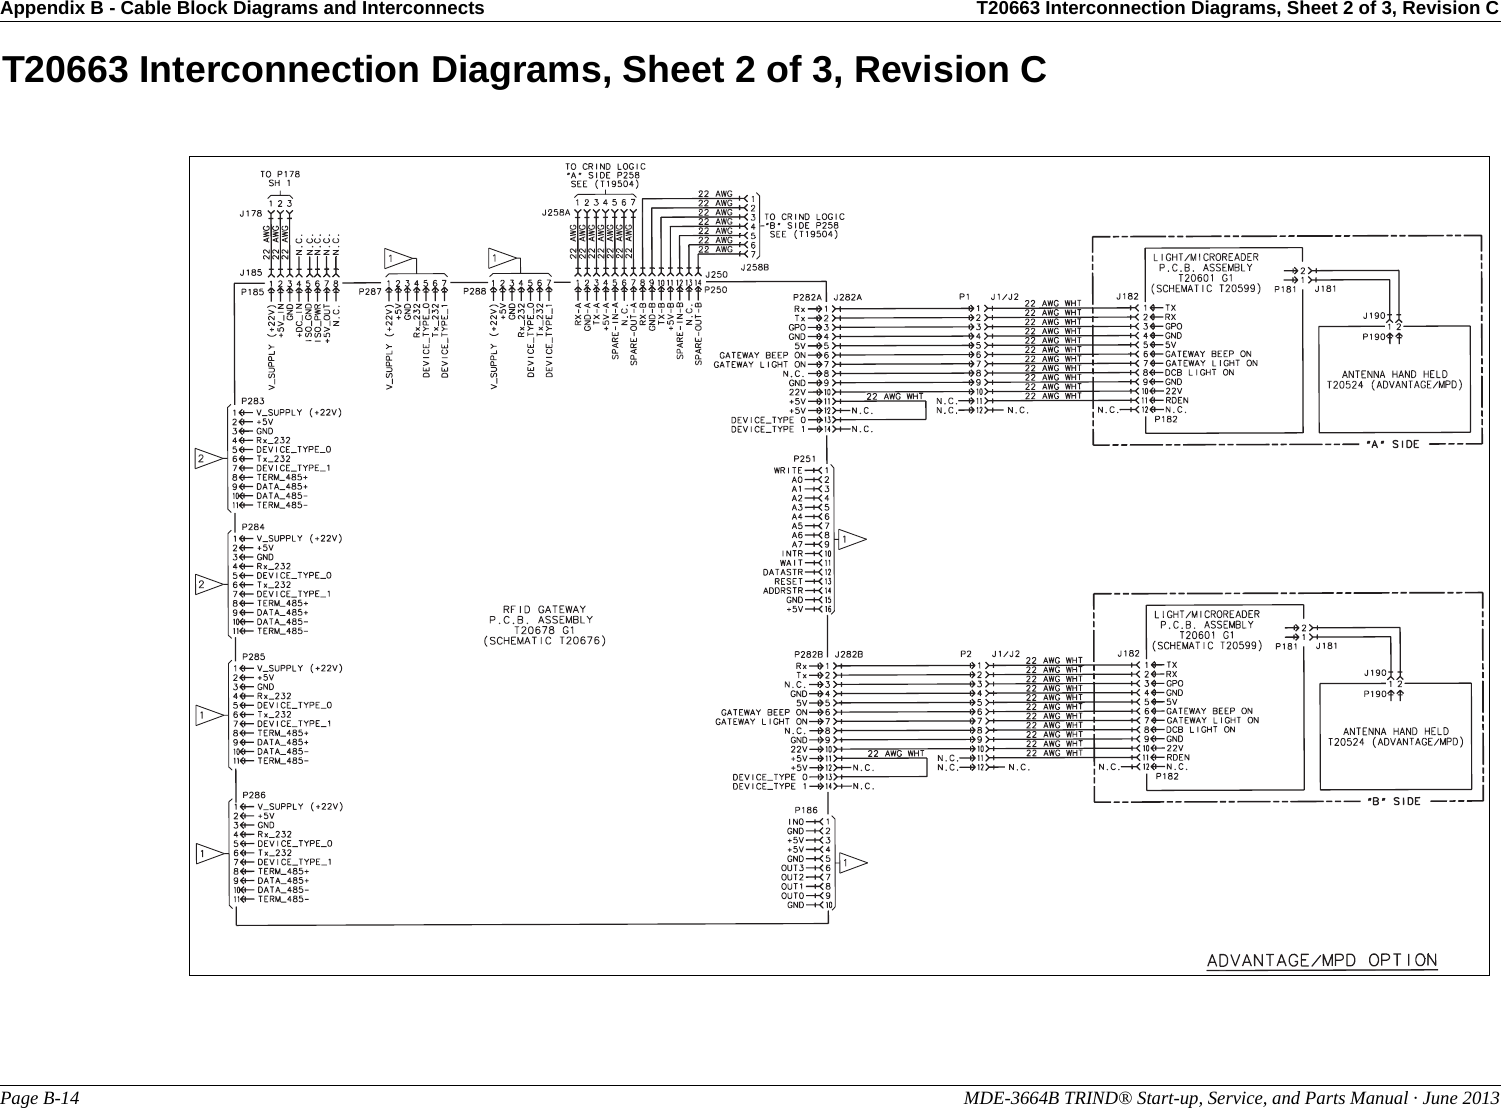 Appendix B - Cable Block Diagrams and Interconnects T20663 Interconnection Diagrams, Sheet 2 of 3, Revision CPage B-14                                                                                                               MDE-3664B TRIND® Start-up, Service, and Parts Manual · June 2013T20663 Interconnection Diagrams, Sheet 2 of 3, Revision C